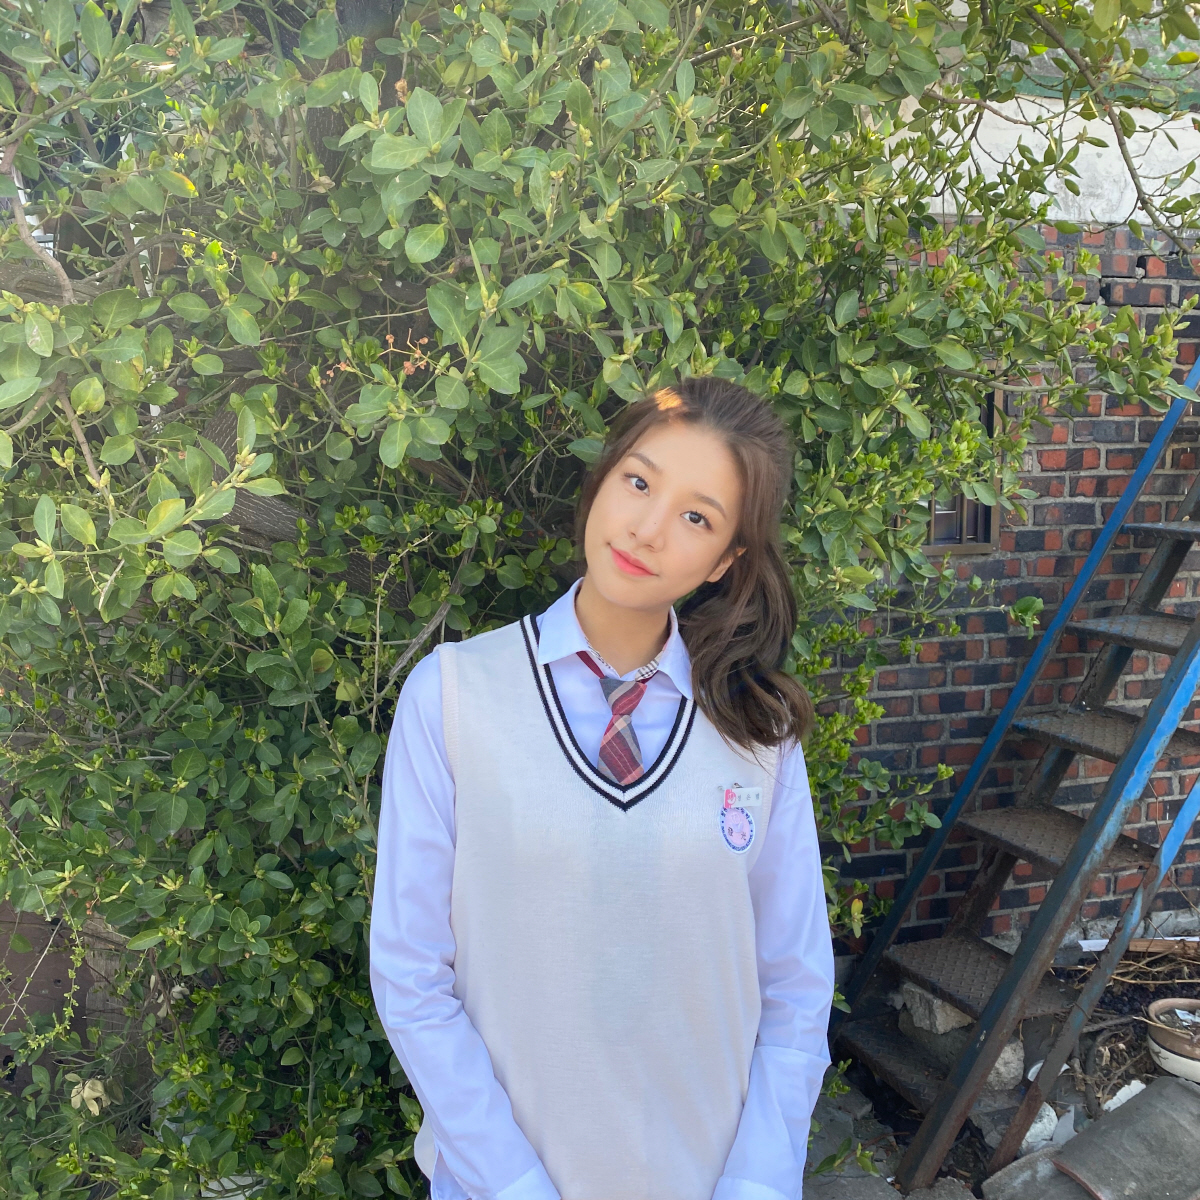 LABOUM (LABOUM) Ahn Sol-bin encouraged SBS Convenience store morning star to watch its first broadcast.Ahn Sol-bin has started to encourage SBS drama Convenience store morning star to be broadcast at 10 pm today through his instagram today (19th).Ahn Sol-bin, along with a picture of visual school uniforms like High school girls, wrote Tonight at 10 pm Convenience store morning star is SBS shooter and showed affection for the drama he appeared in.Ahn Sol-bin will appear as a beautiful high school student Jung Eun-bum who dreams of an entertainer on SBS Convenience store star and will show his sister Kim Yoo-jung, who plays the role of his sister Jung-Sun-Sun-Sun-Sun, and will show his unique talent and resplendent acting.On the other hand, Ahn Sol-bin is active in various fields with various charms such as acting, entertainment MC as well as singer and charm like pale color.